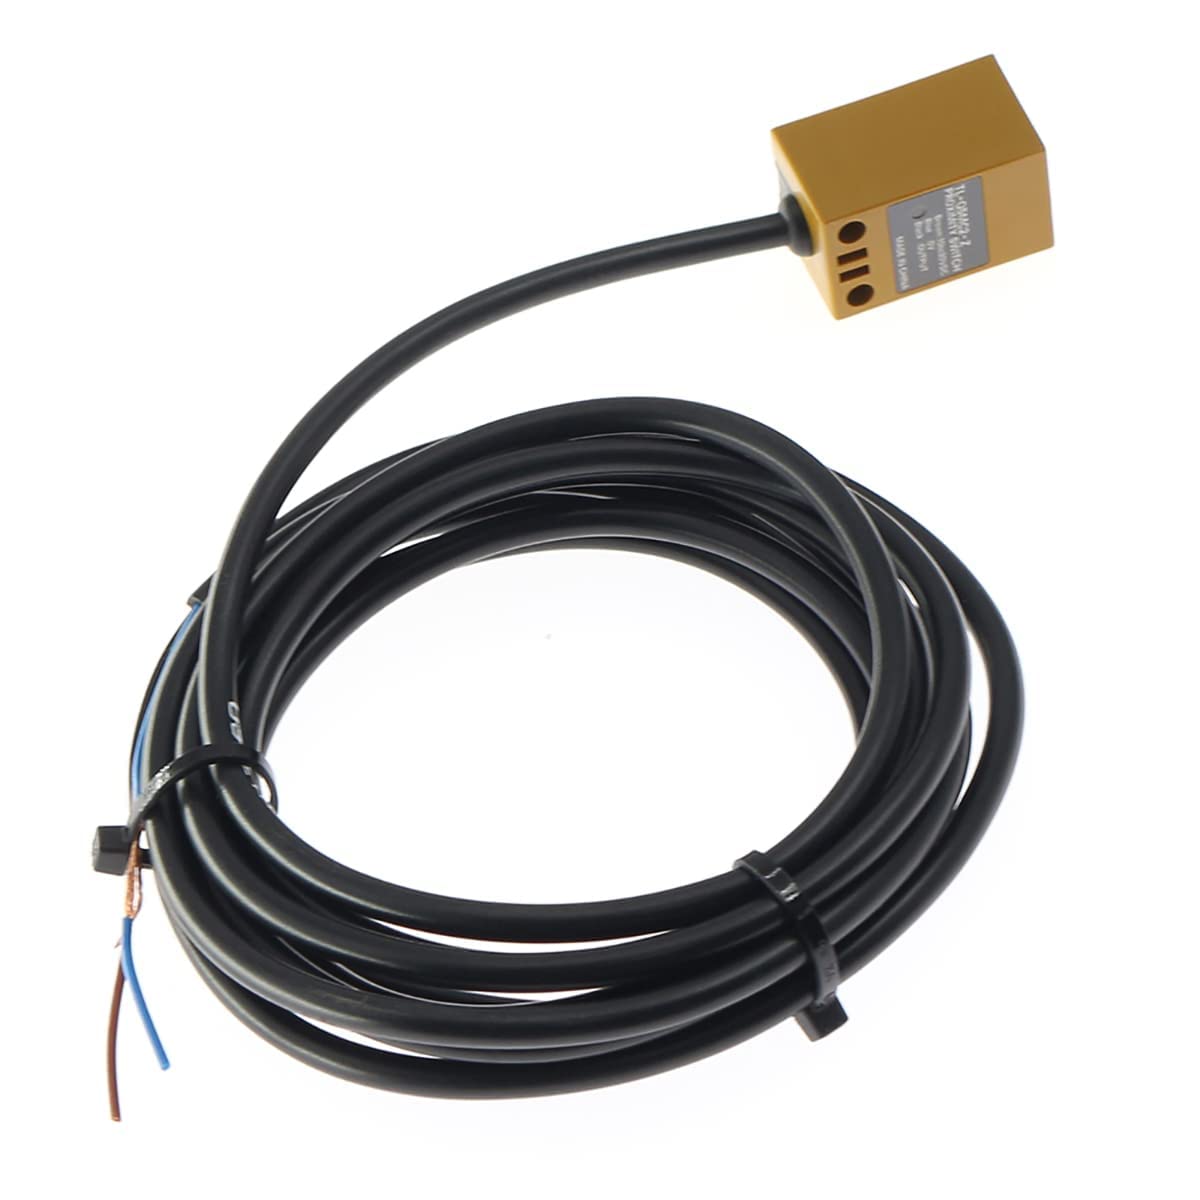 Omron Proximity Sensor Switch (TL-Q5MC2-Z) for Voron SwitchWire, 1.6, 1.8, 2.0, 21, 2.2 and 2.4